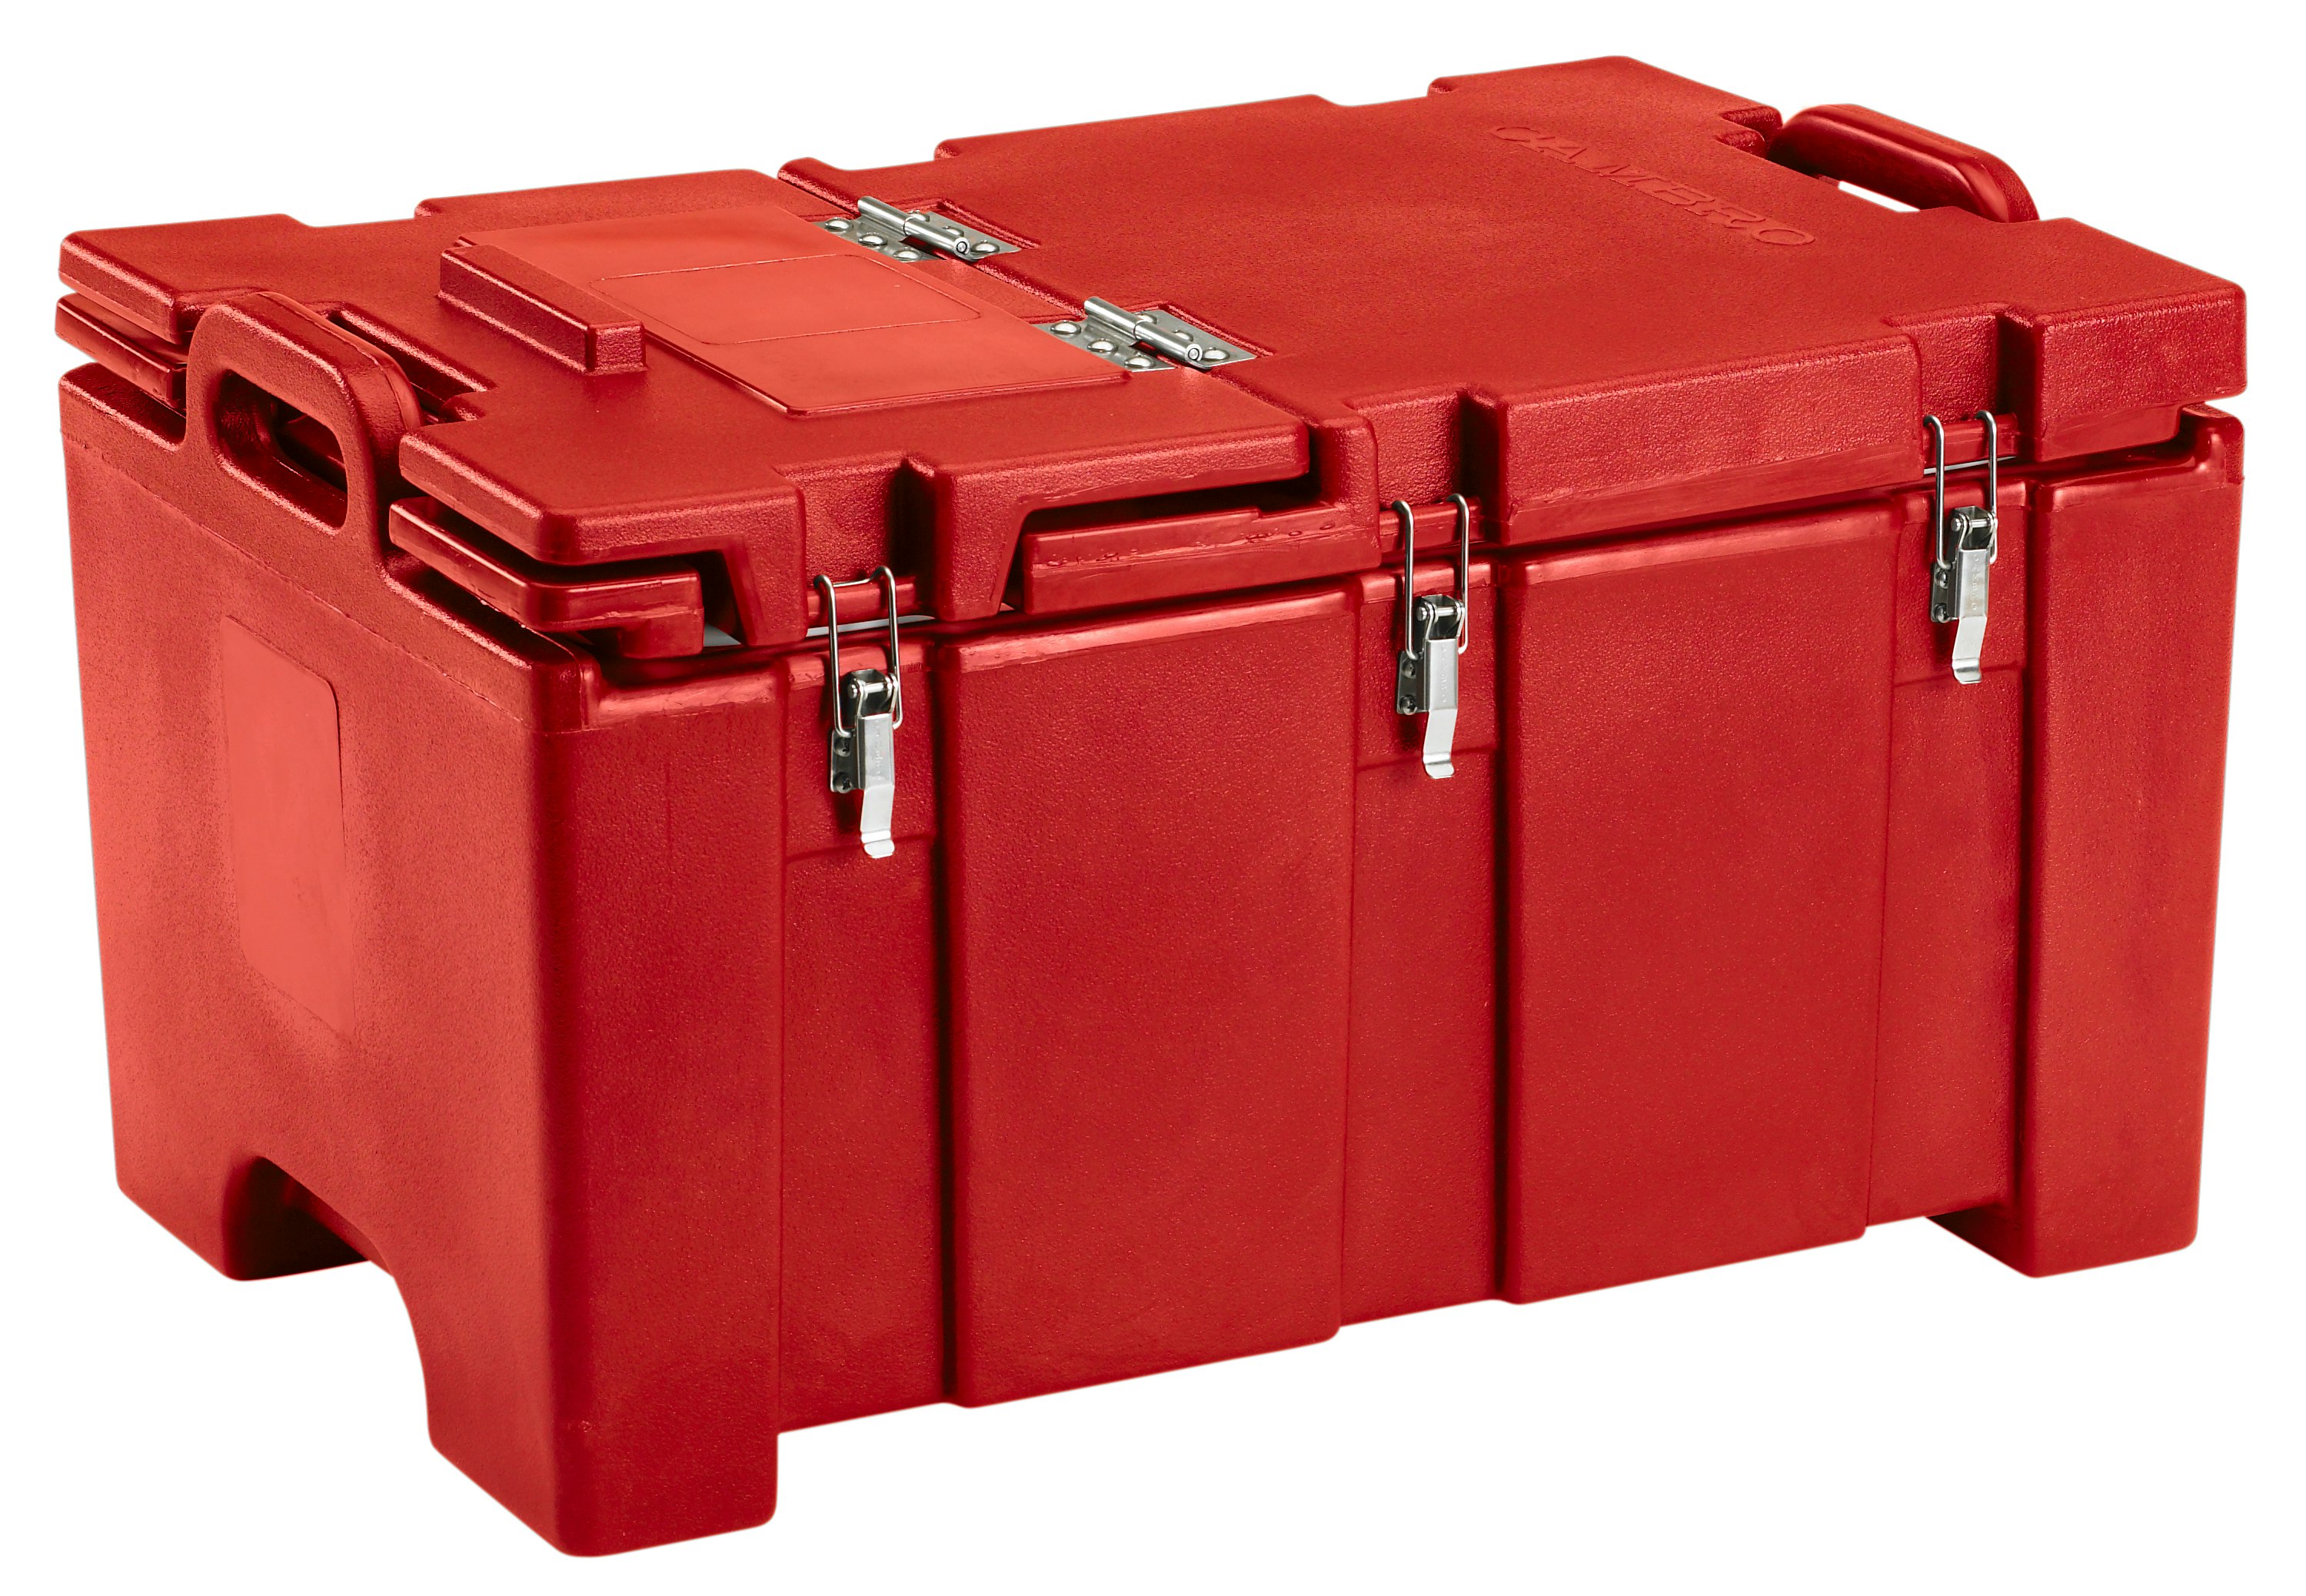 Cambro 500LCD158 Hot Red 4.75 Gallon Camtainer Insulated Beverage Carrier